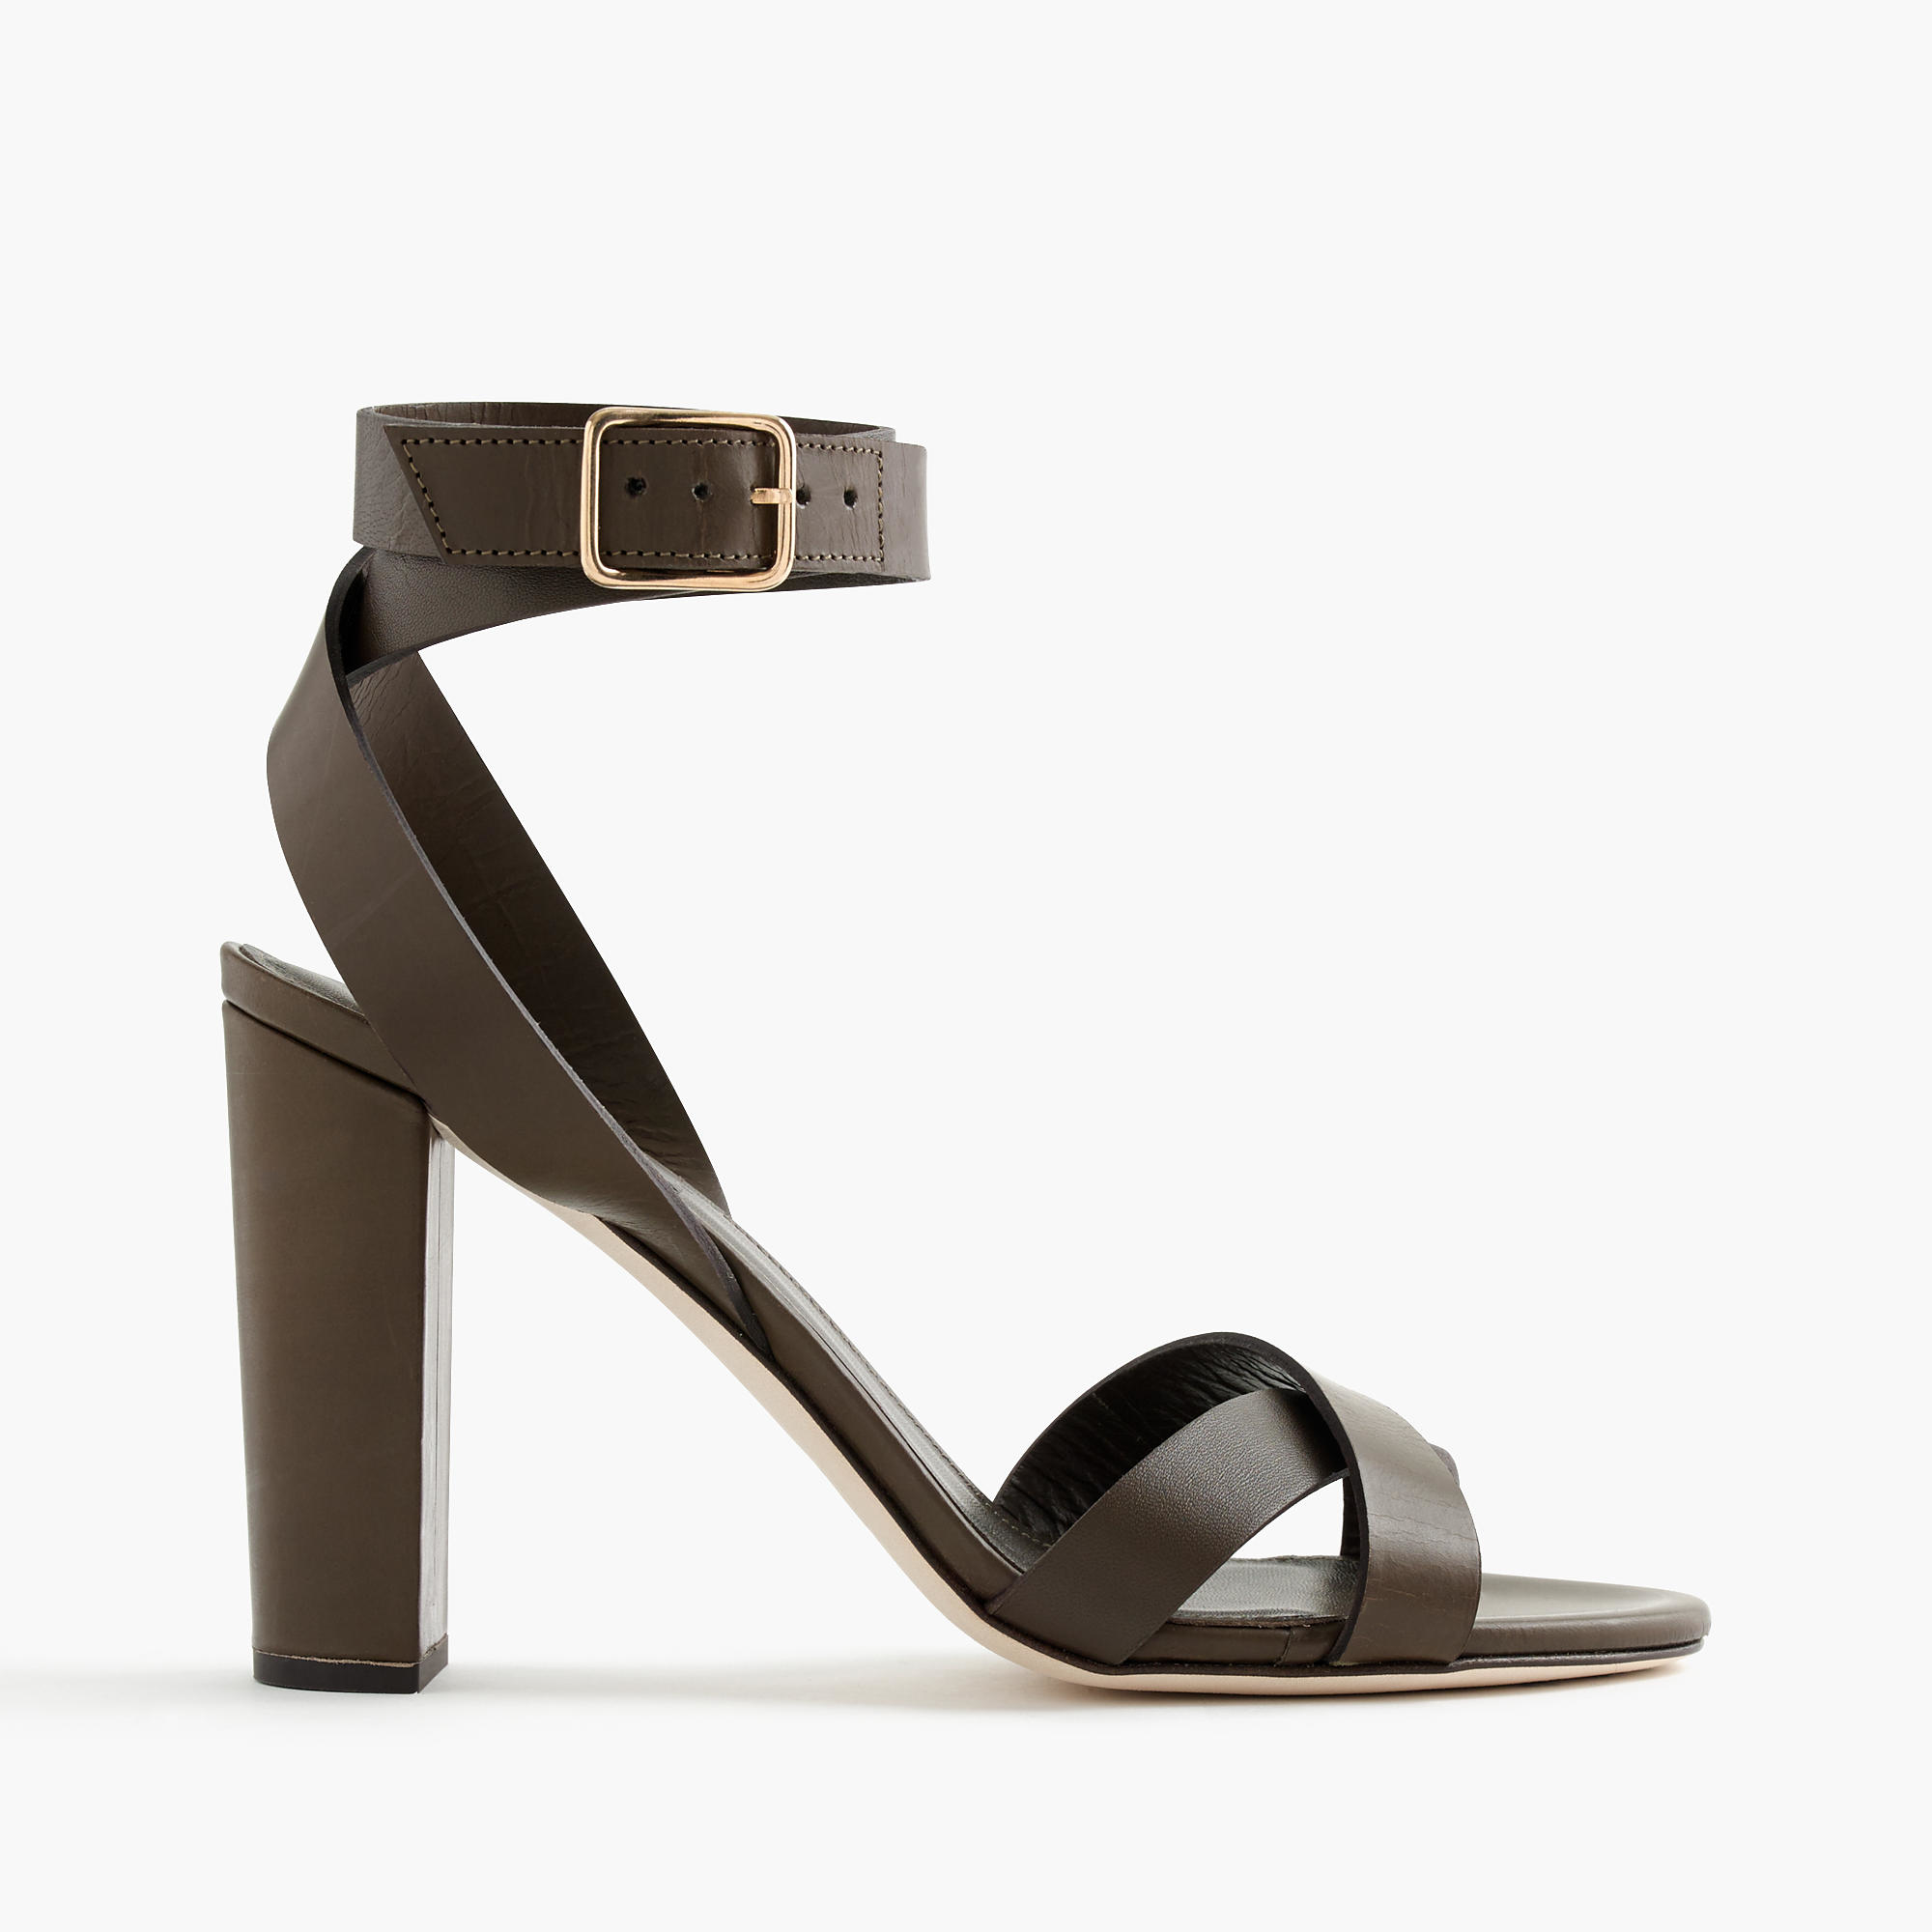 Lyst - J.Crew Leather Cross-strap Sandals in Green